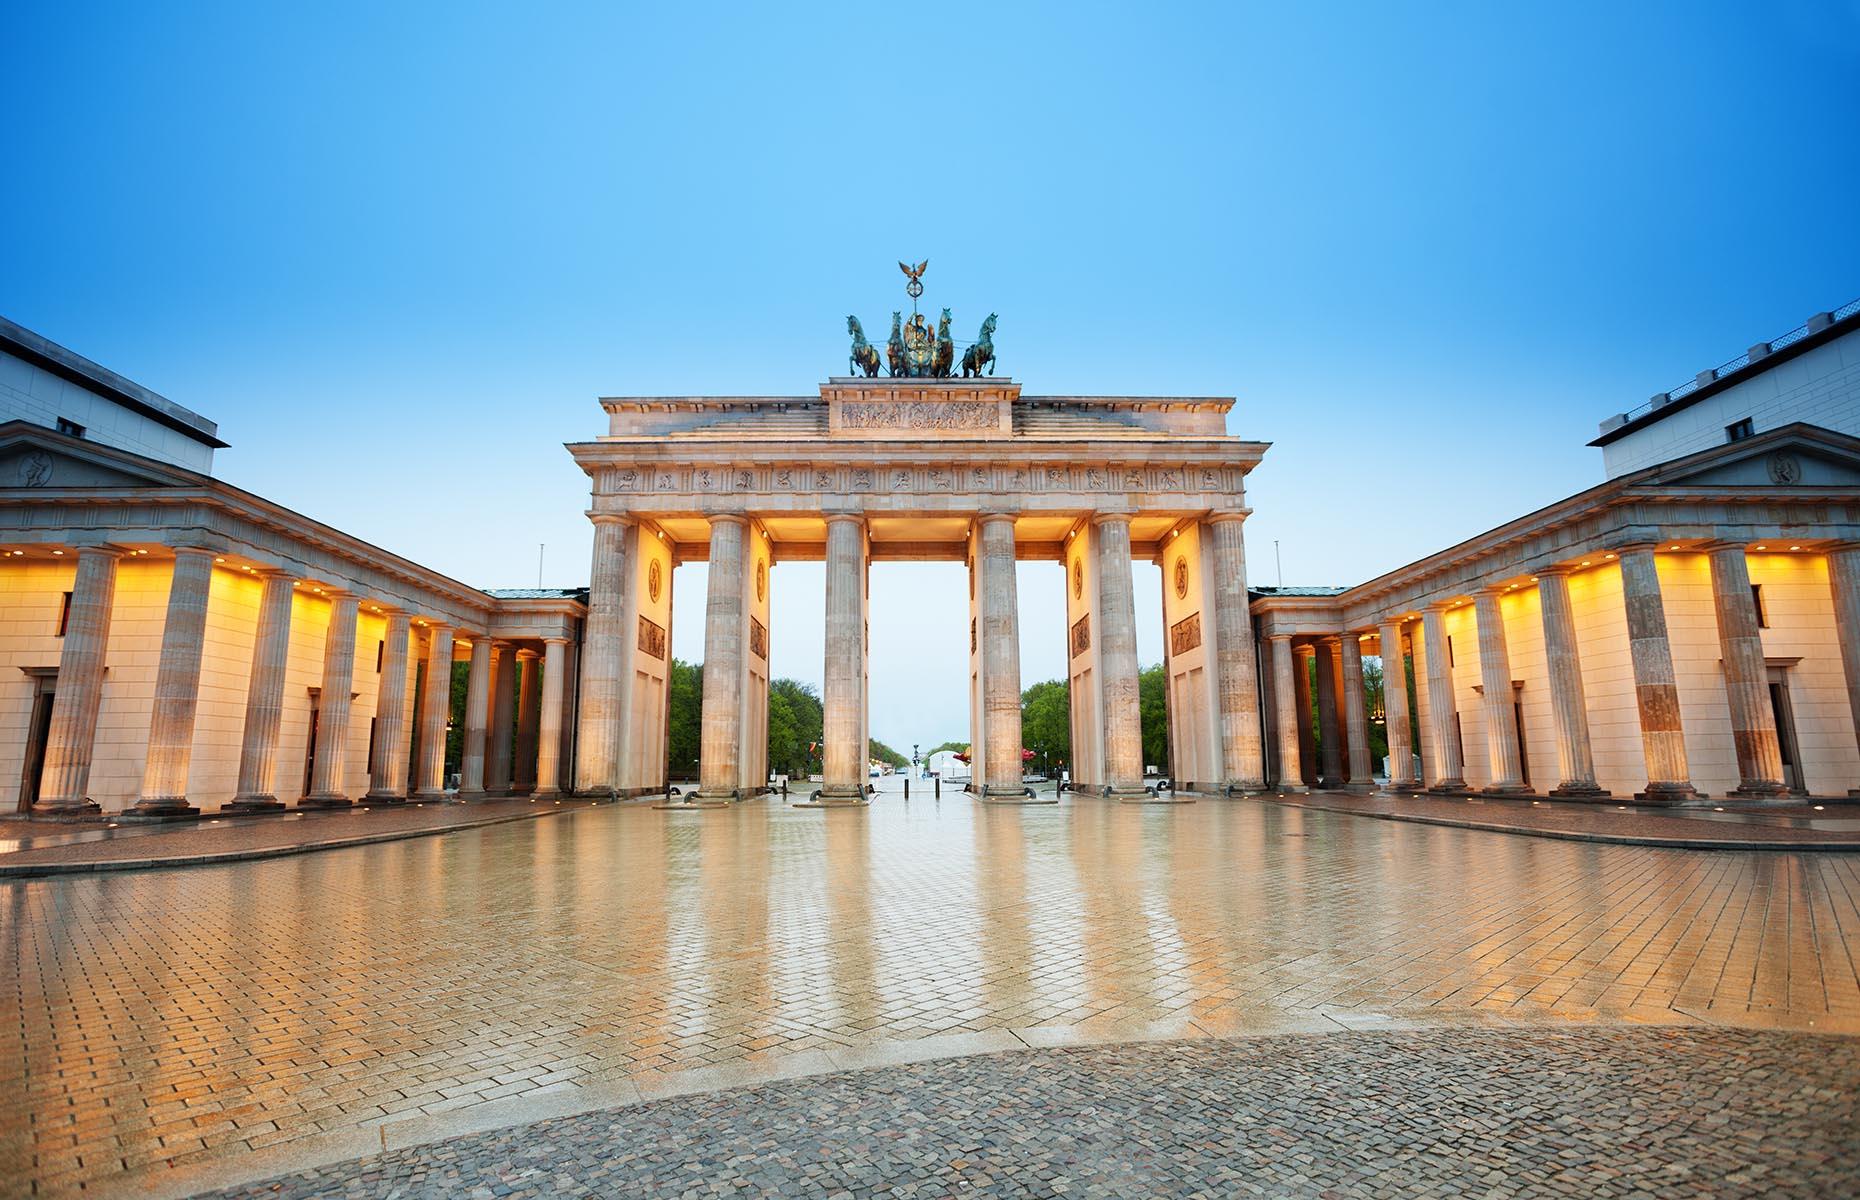 <p>Germany's capital <a href="http://www.loveexploring.com/guides/80368/explore-berlin-the-top-things-to-do-where-to-stay-what-to-eat">Berlin</a> is packed with both history and culture everywhere you look. Stories of the country's past are reflected in landmarks such as the East Side Gallery (the remains of the Berlin Wall) as well as Checkpoint Charlie (a historic crossing point between former East and West Germany). The Brandenburg Gate (pictured), one of the city's most famous sights, is regarded as a symbol of Europe's tumultuous history as well as unity and peace across the region.</p>